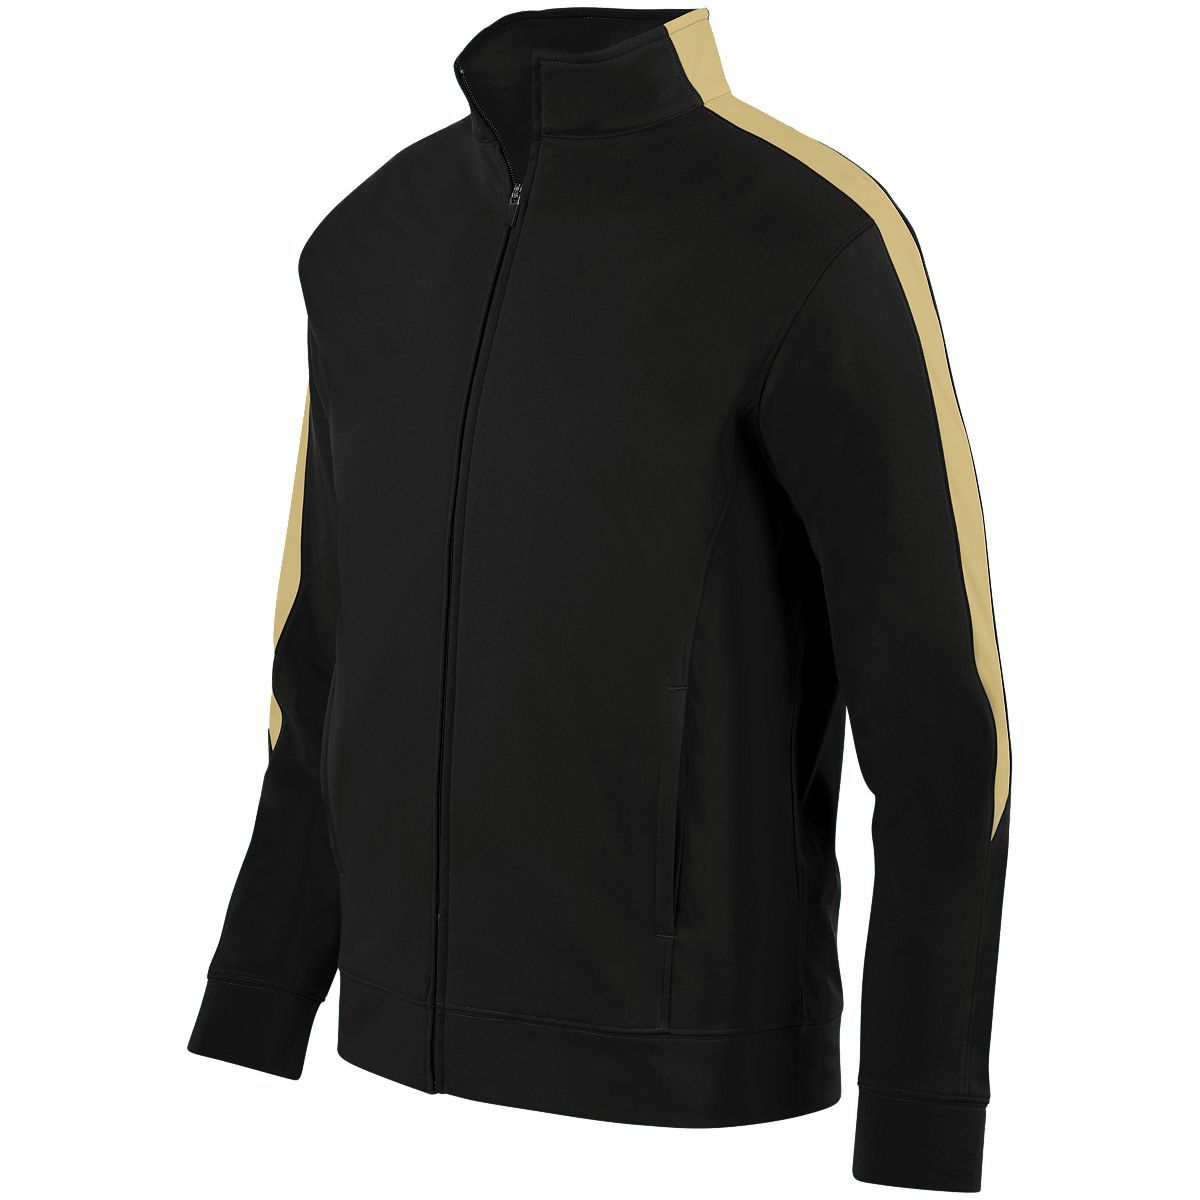 Augusta Sportswear Youth Medalist Jacket 2.0 in Black/Vegas Gold  -Part of the Youth, Youth-Jacket, Augusta-Products, Outerwear product lines at KanaleyCreations.com